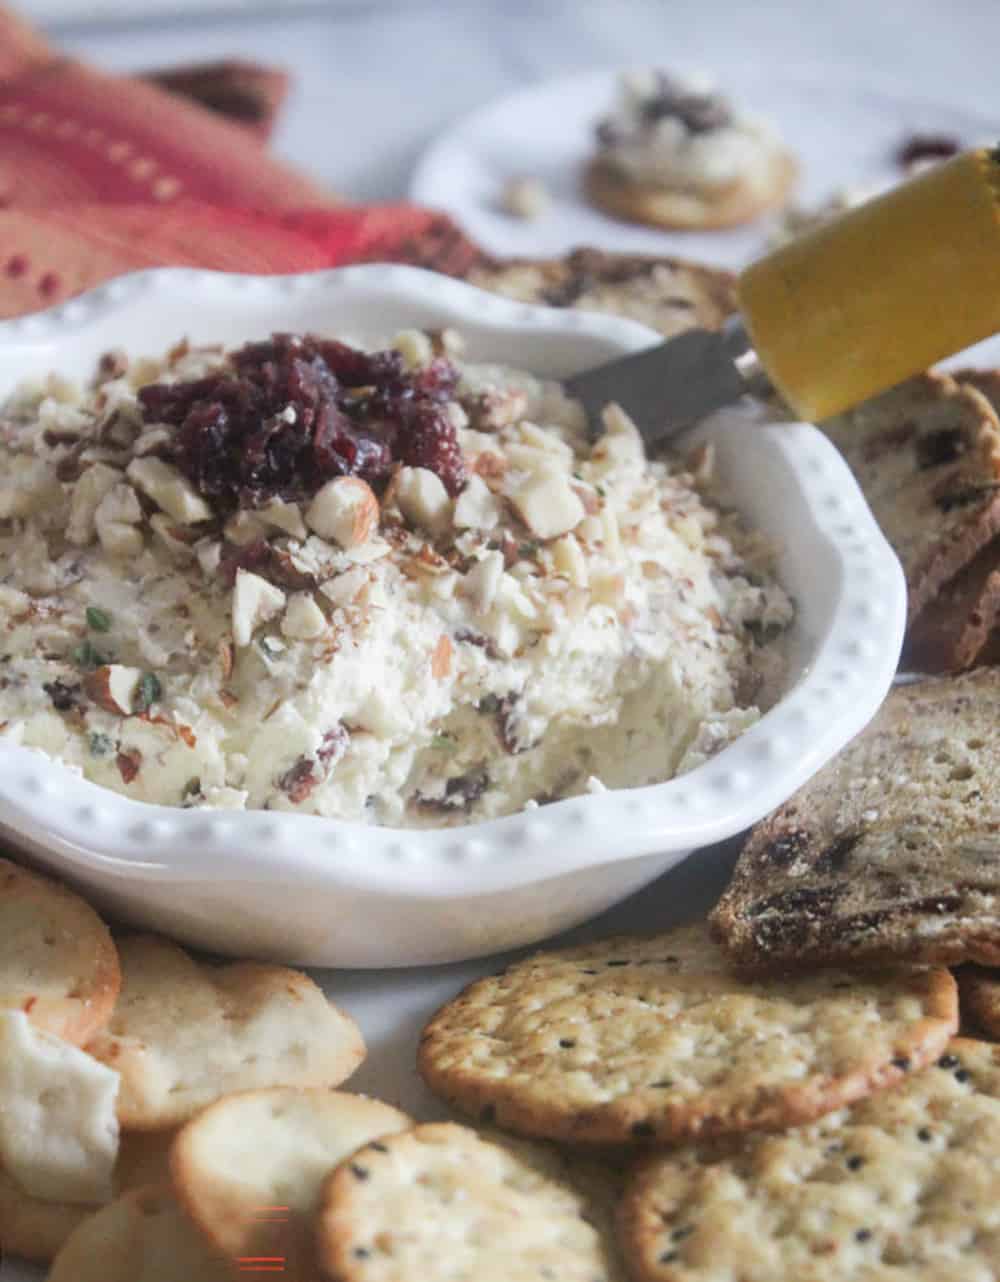 Cranberry dip in a white bowl with a knife in it